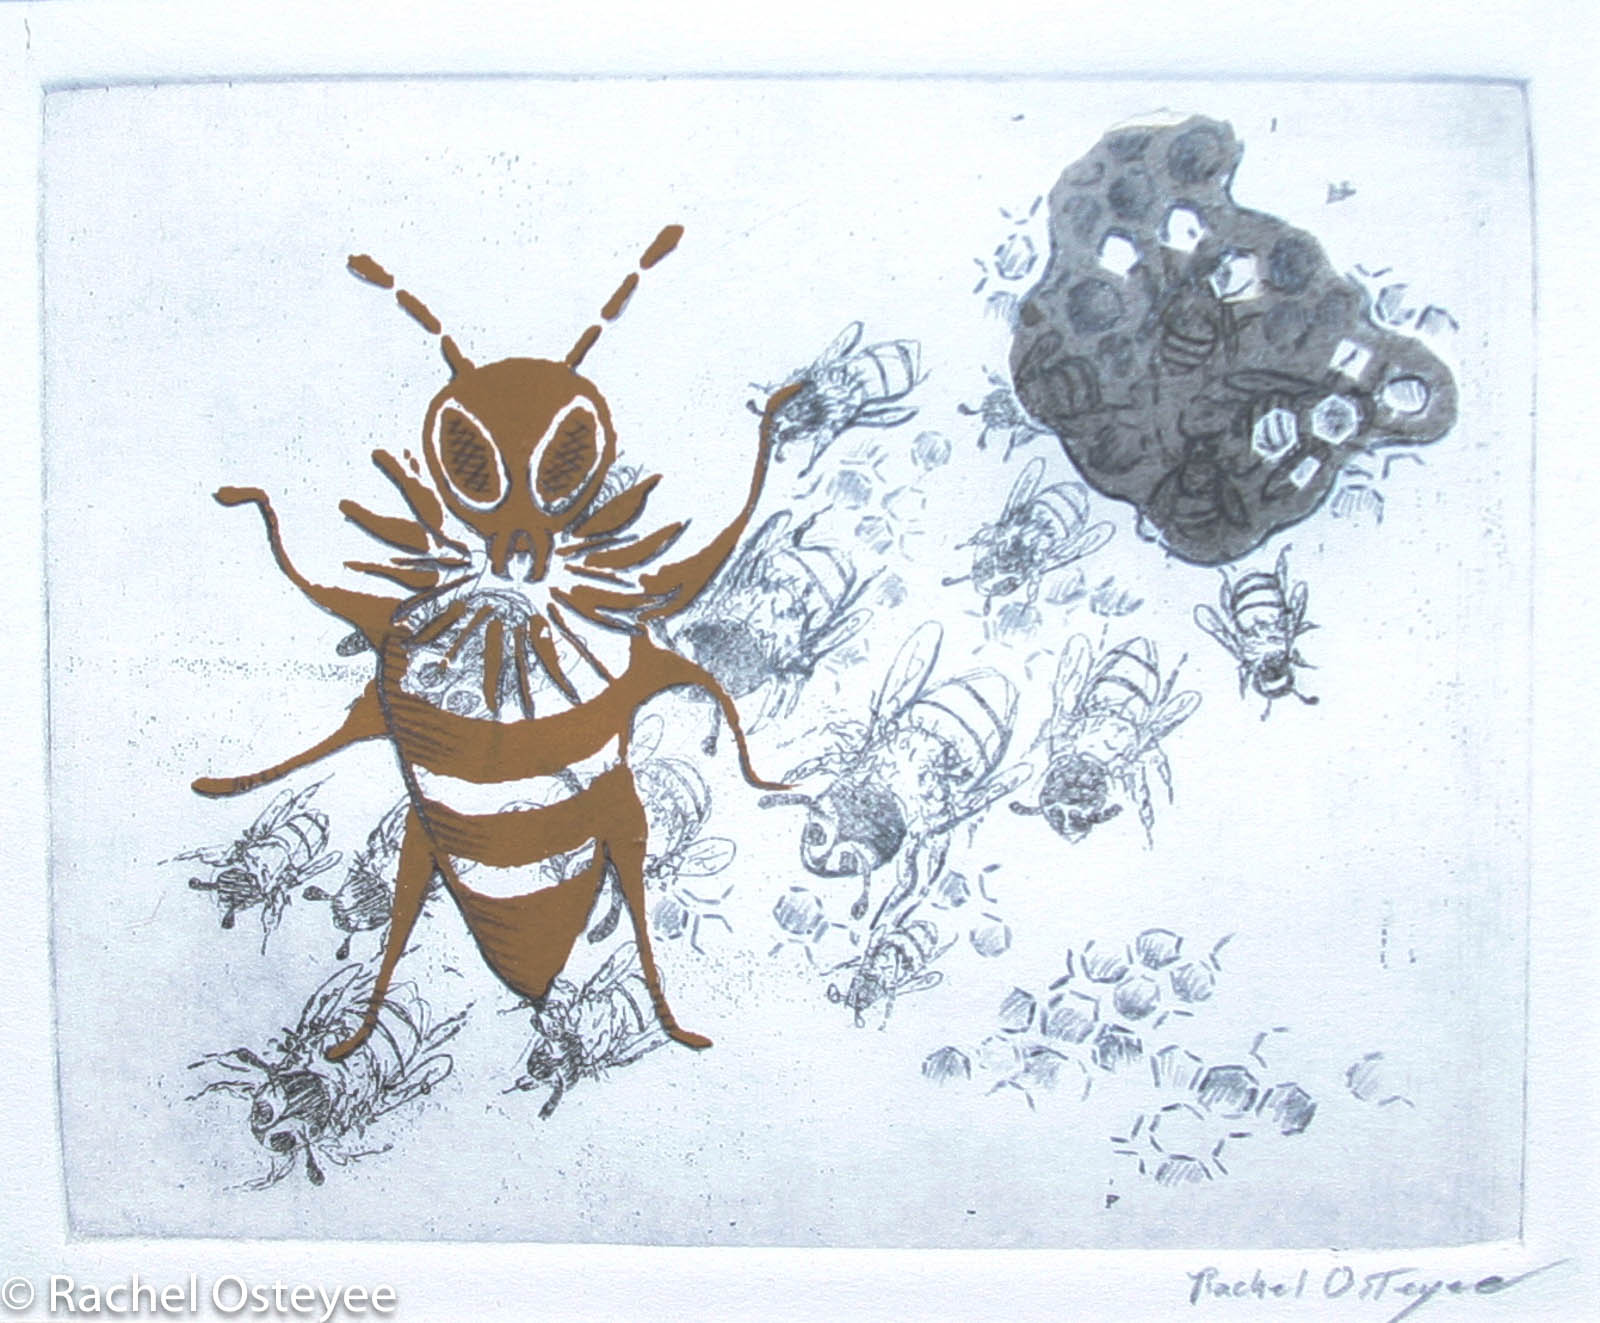 Bee (5" x 4", Etching and Serigraphy)